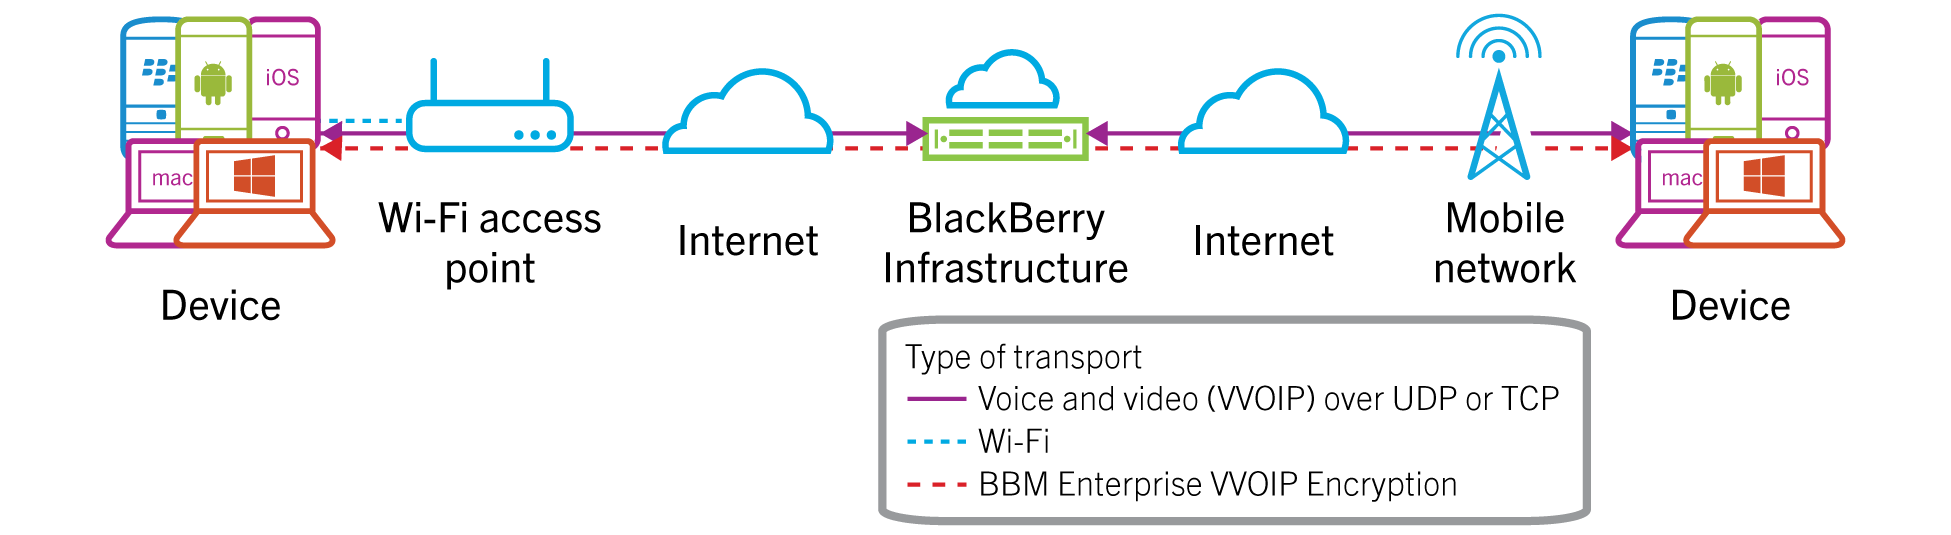 Architectural diagram showing how BBM Enterprise                        voice and video protects messages between a device on a Wi-Fi network and a device on a mobile network through the                            BlackBerry Infrastructure during data transfer